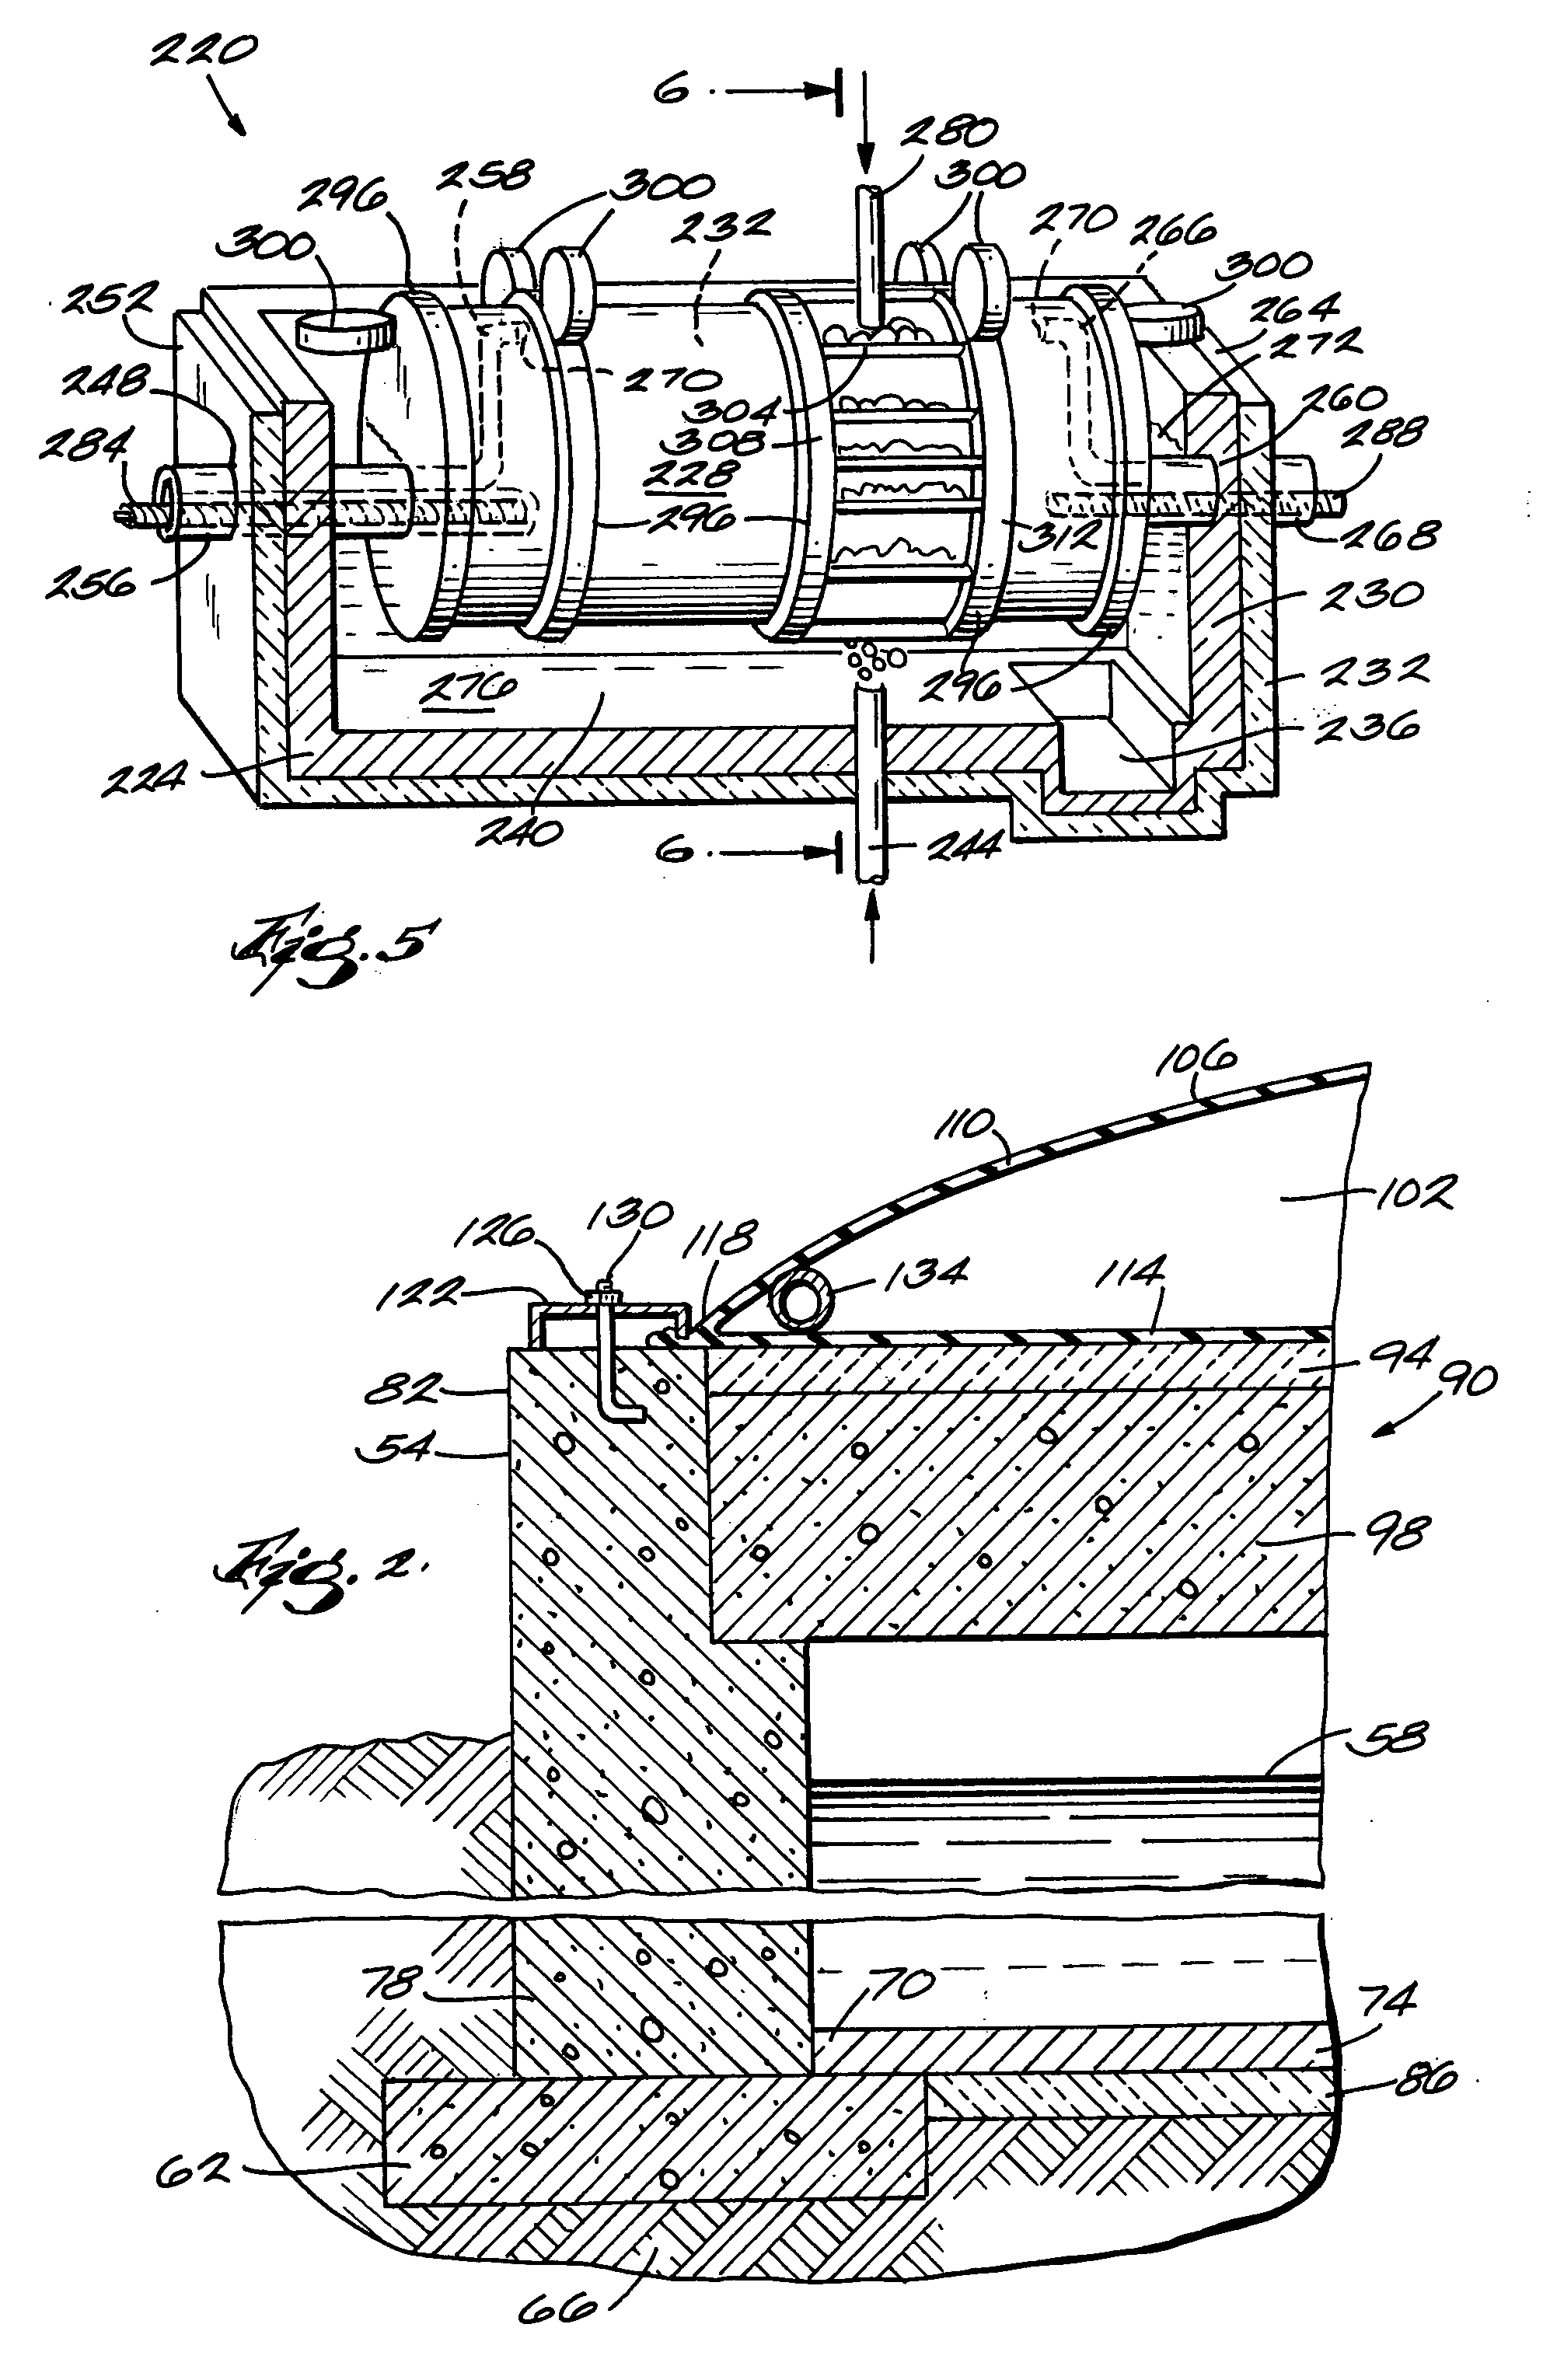 Method and apparatus for solids processing